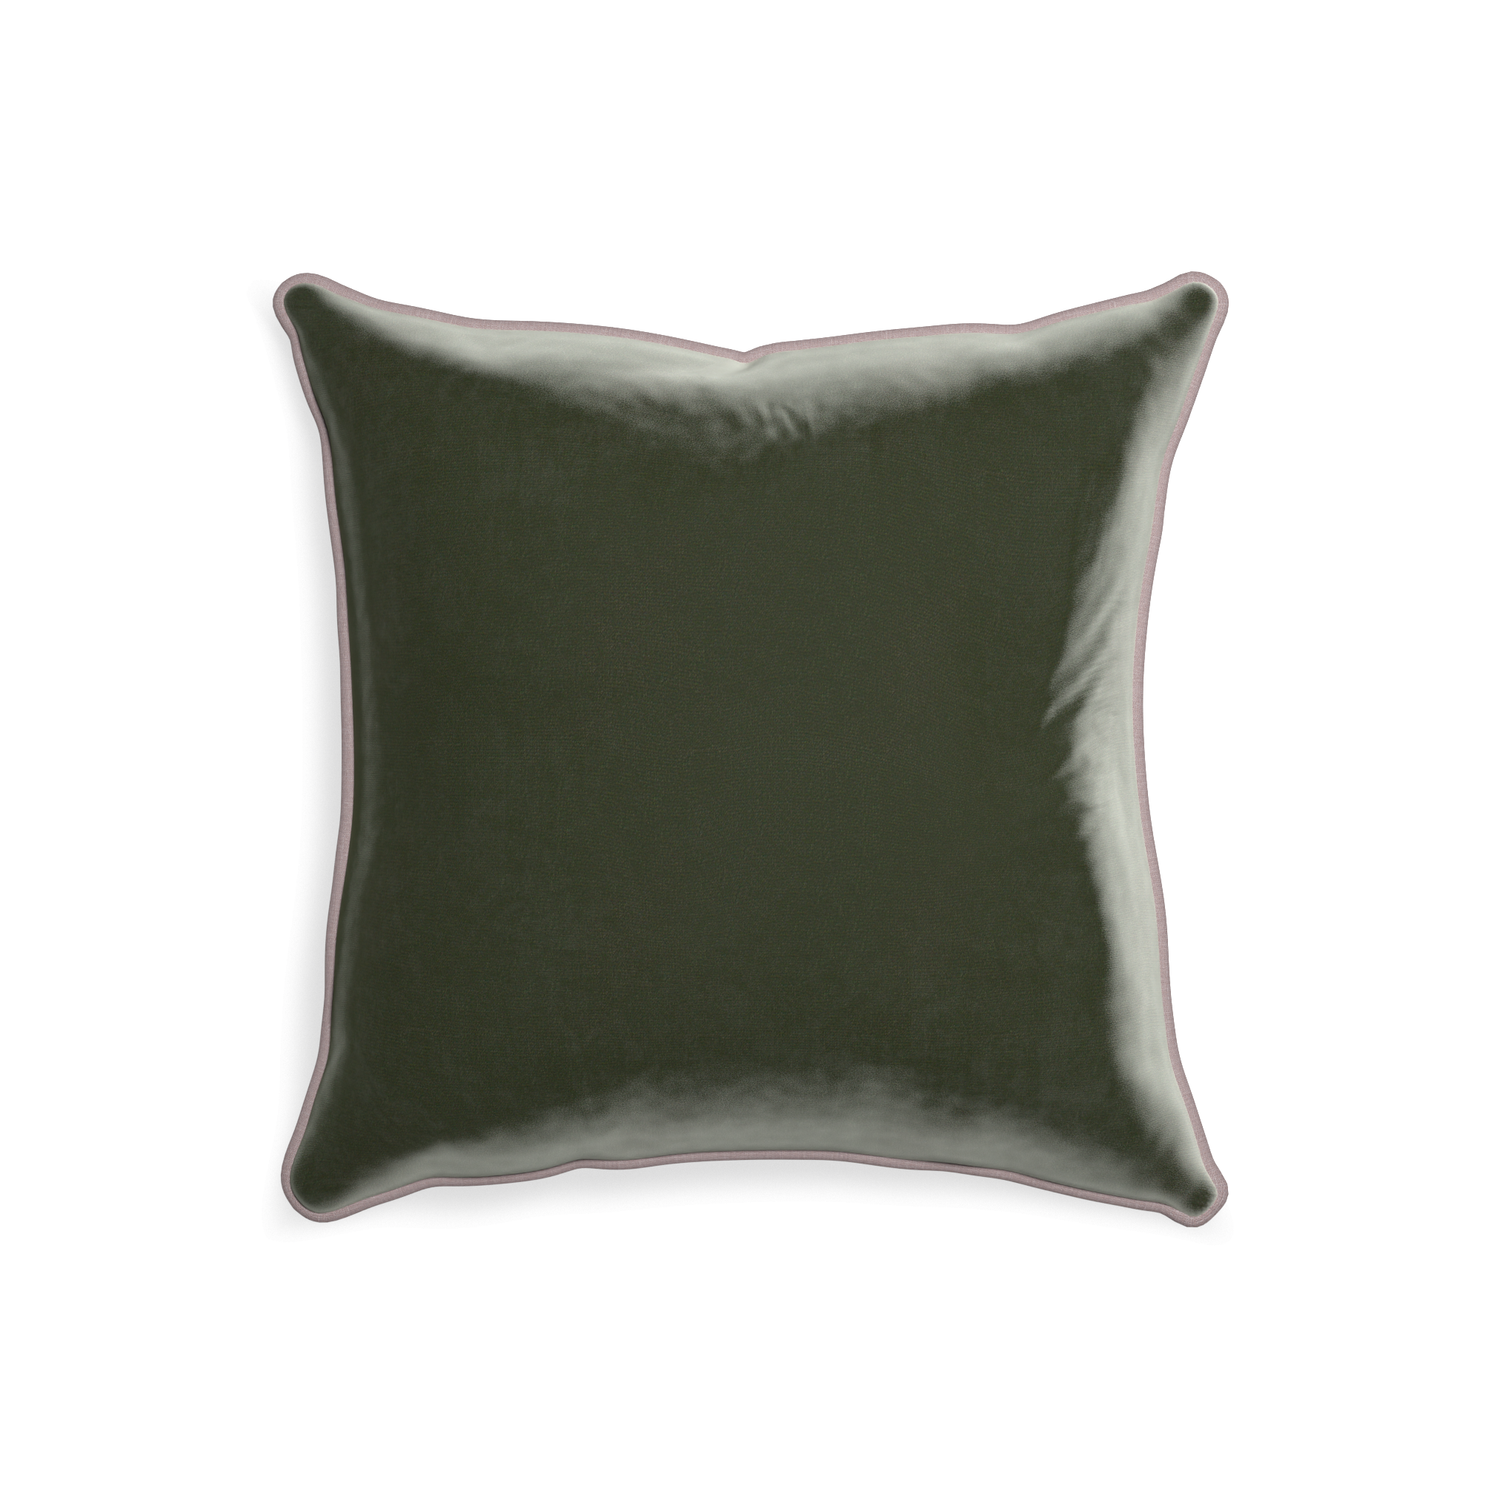 20-square fern velvet custom fern greenpillow with orchid piping on white background